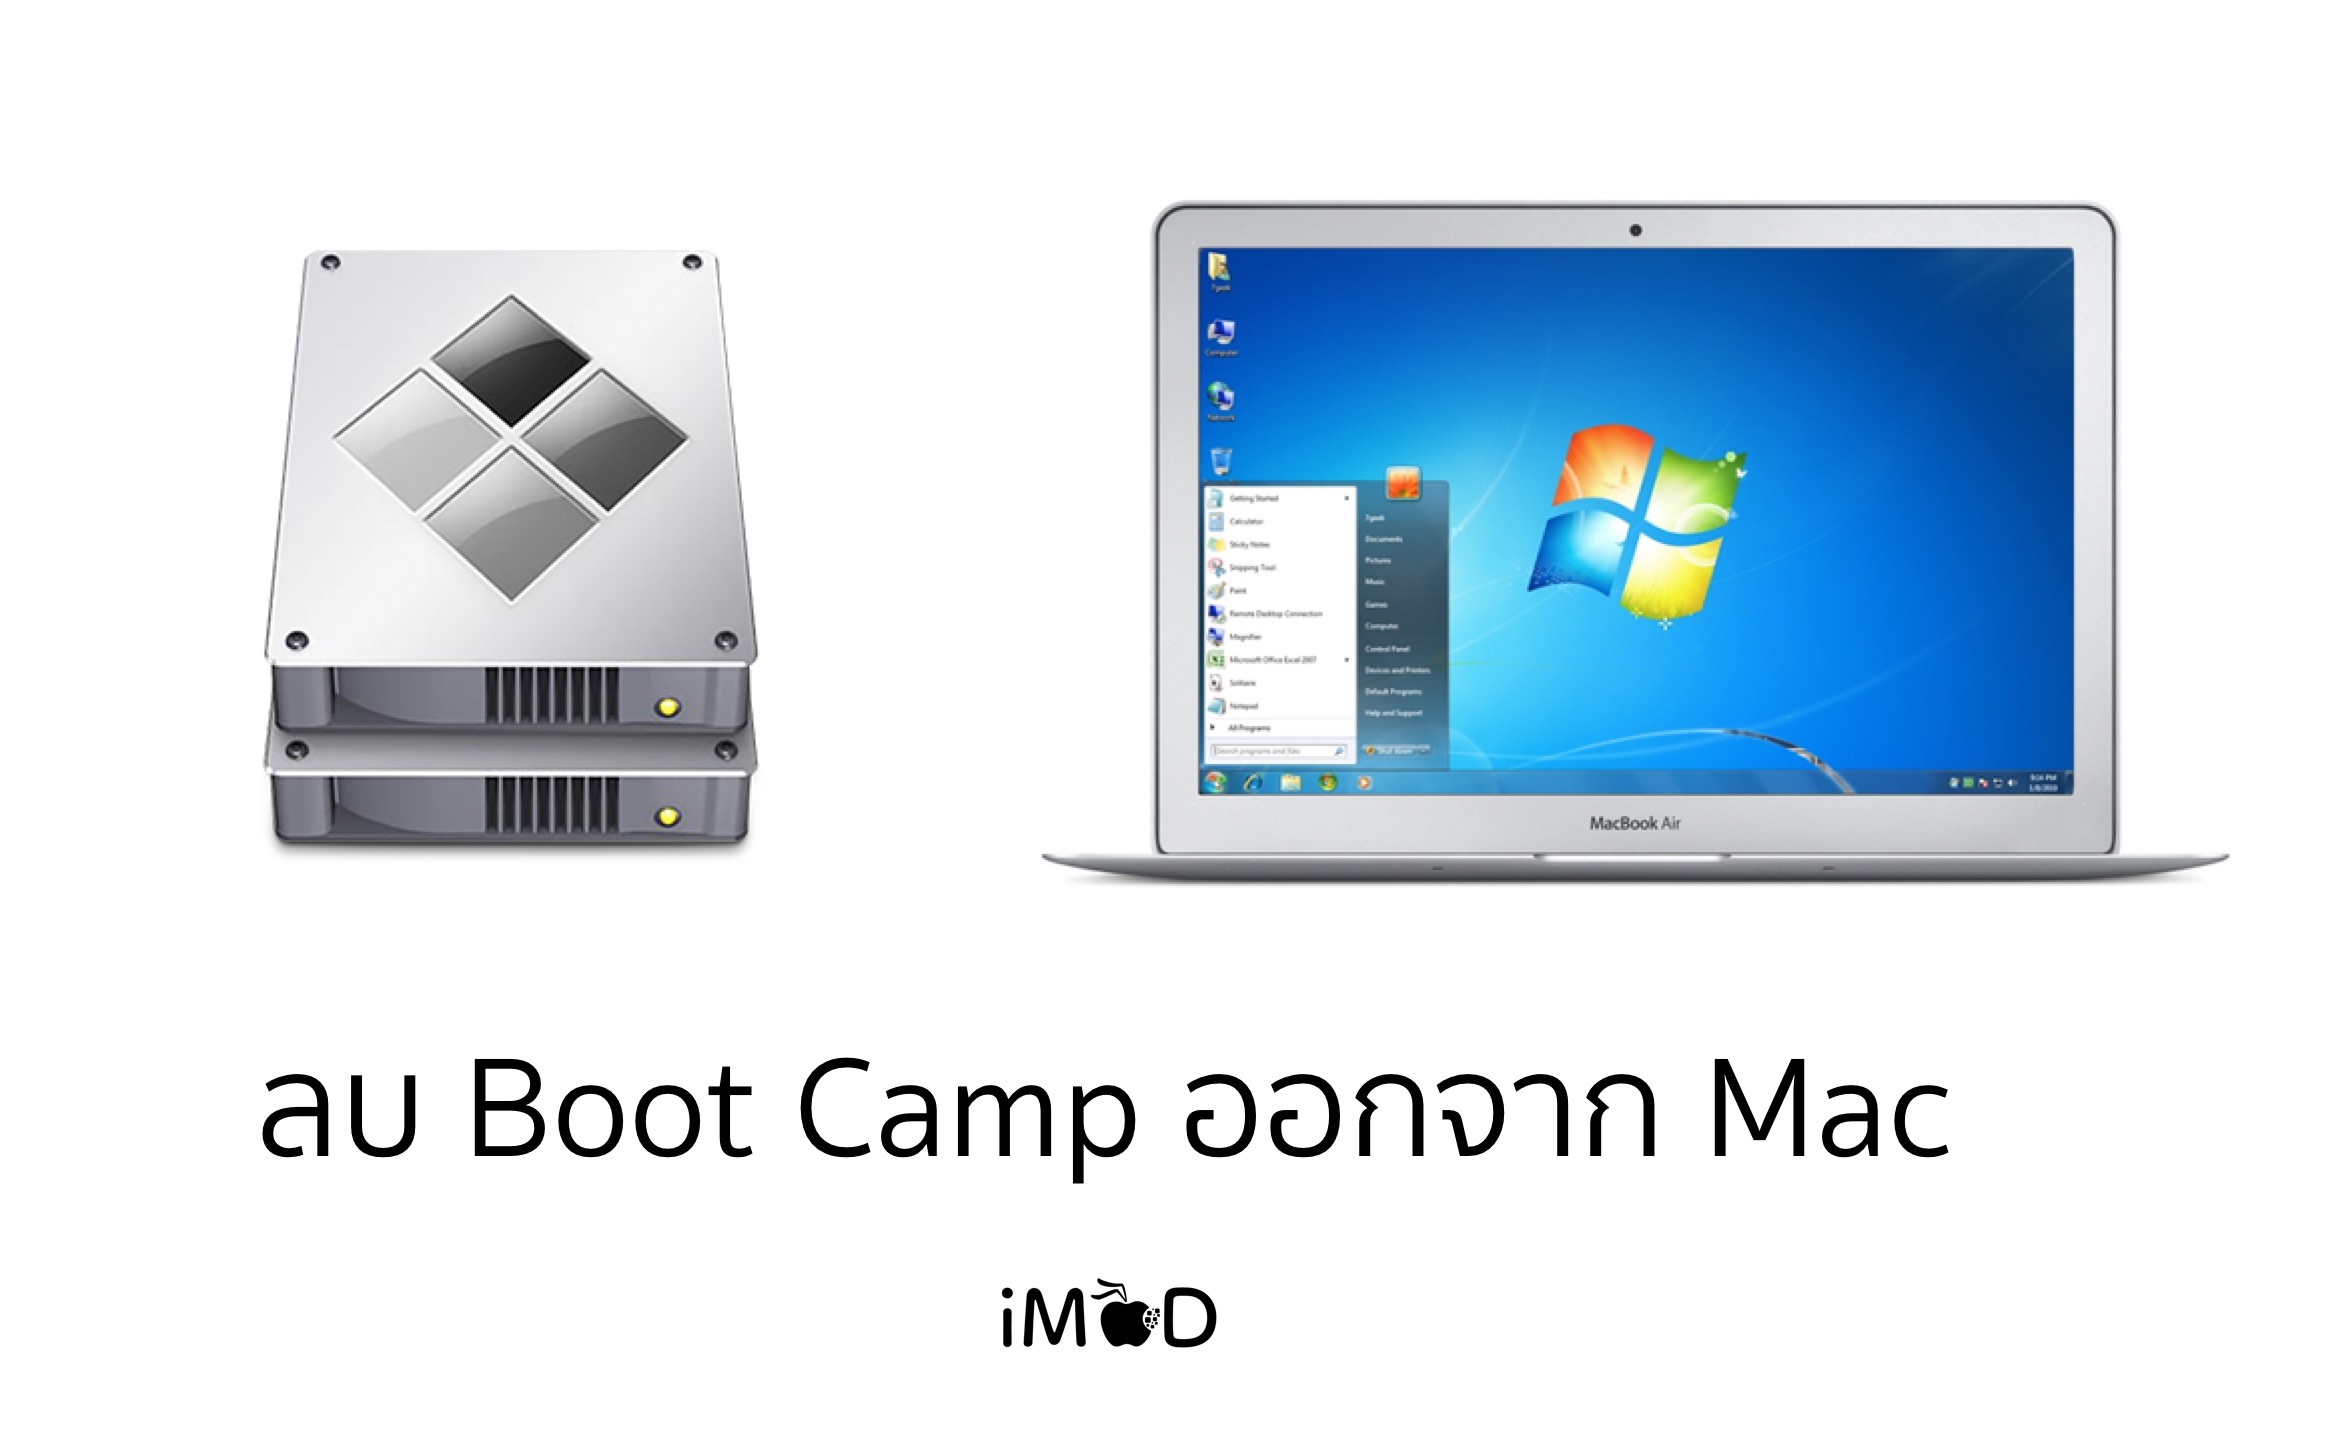 boot camp support software for macbook pro mid 2014